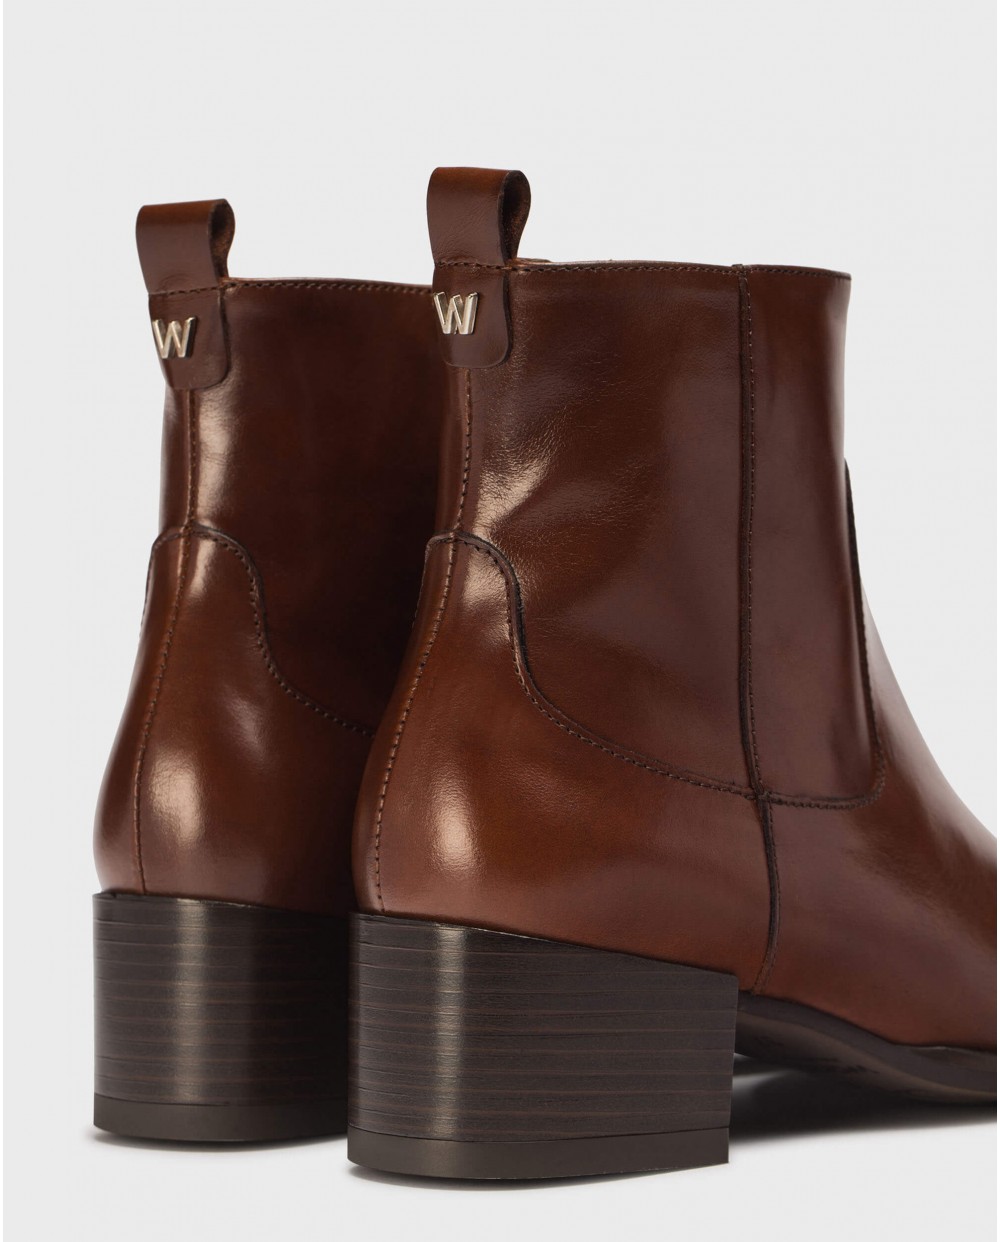 Wonders-Ankle Boots-Brown LOOK ankle boot